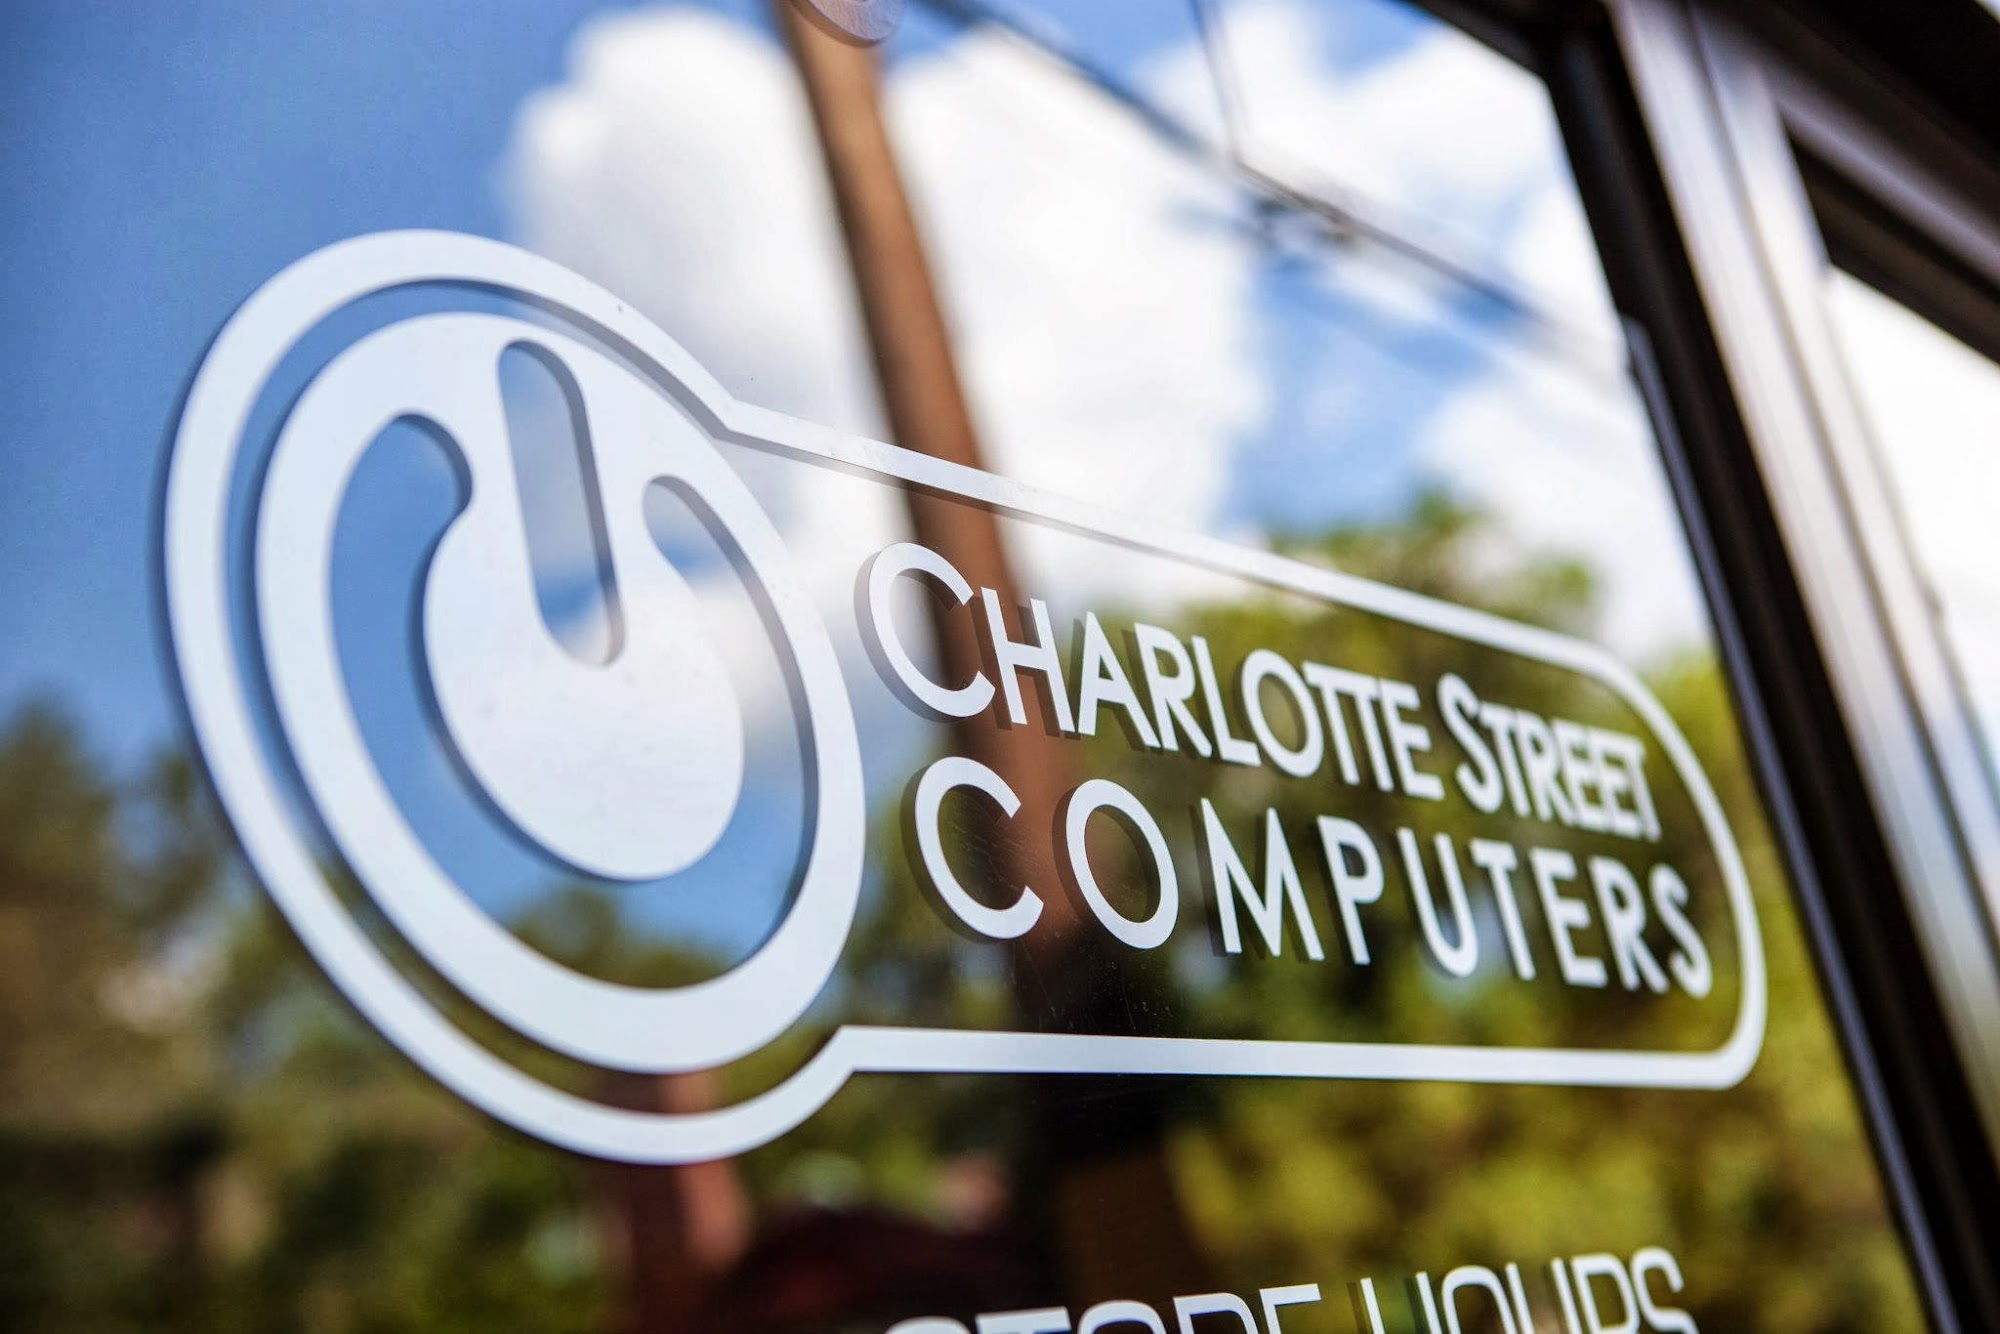 Charlotte Street Computers - Apple Authorized Service Provider